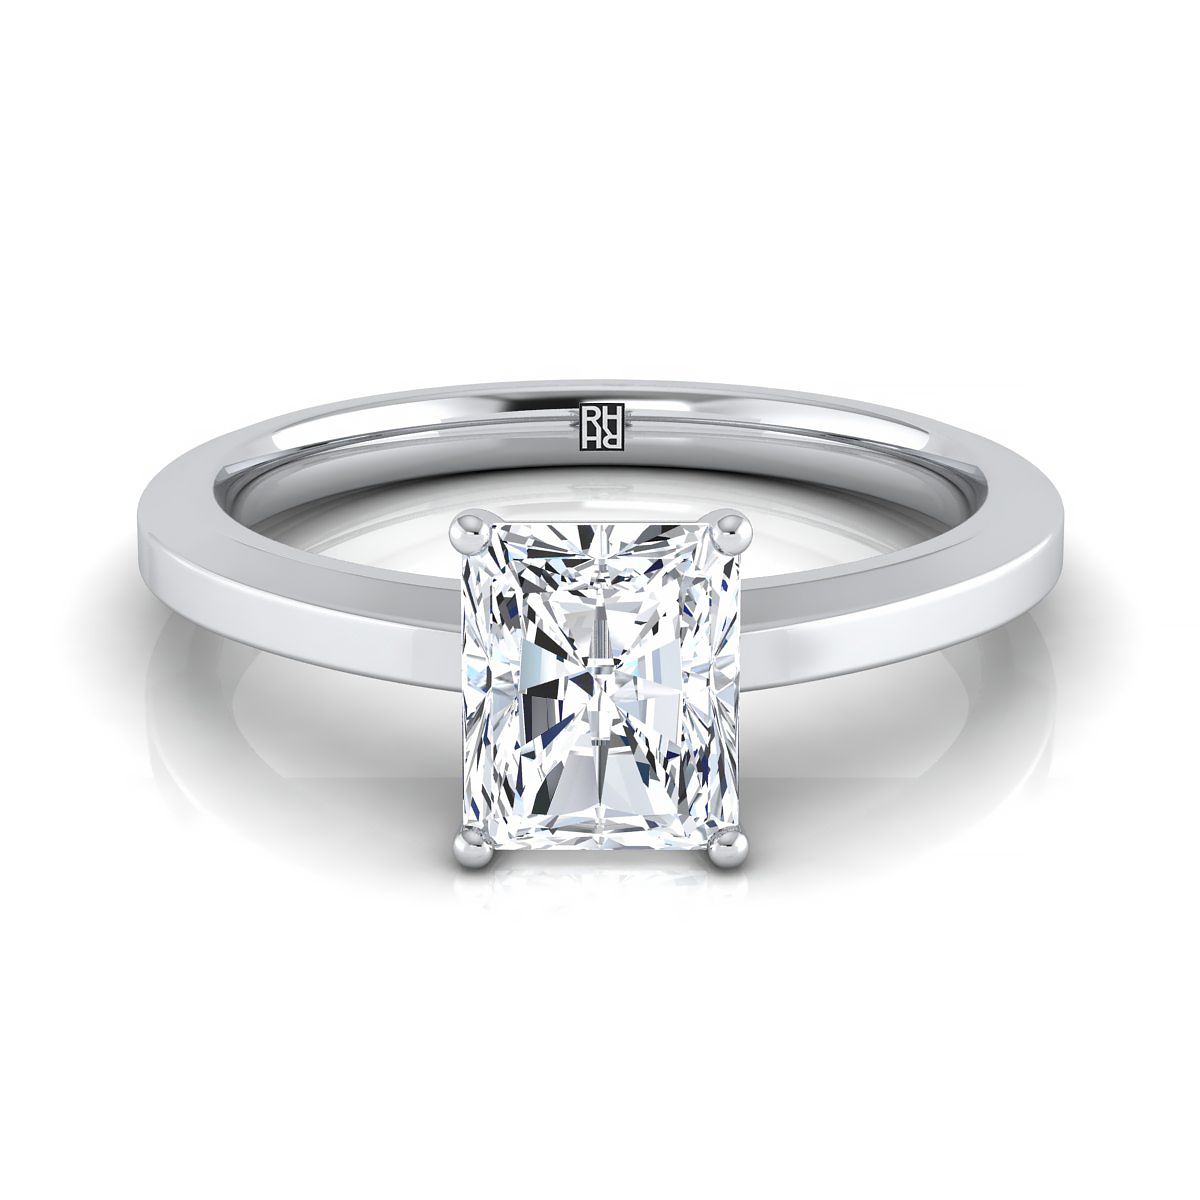 18K White Gold Radiant Cut Center  Beveled Edge Comfort Style Bright Finish Solitaire Engagement Ring